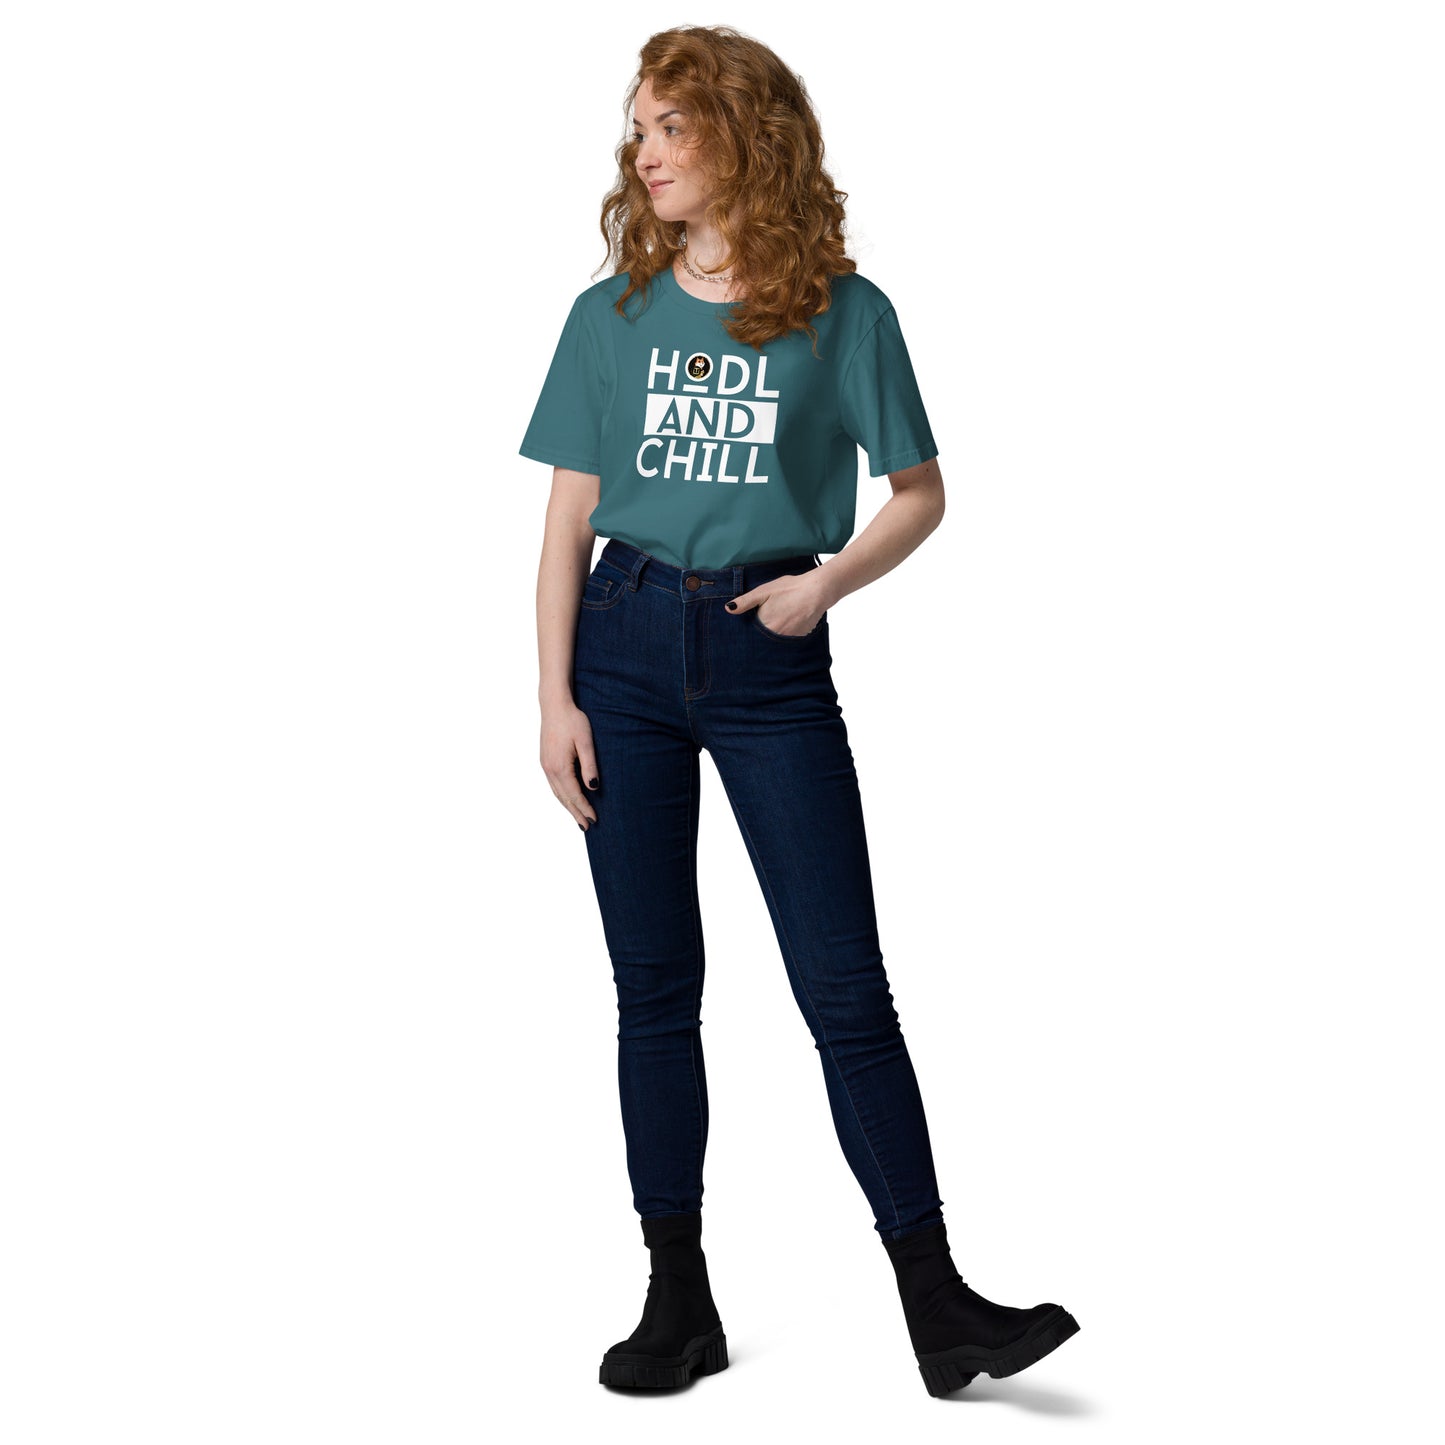 Son Of Doge 'Hodl And Chill' Women's organic cotton t-shirt